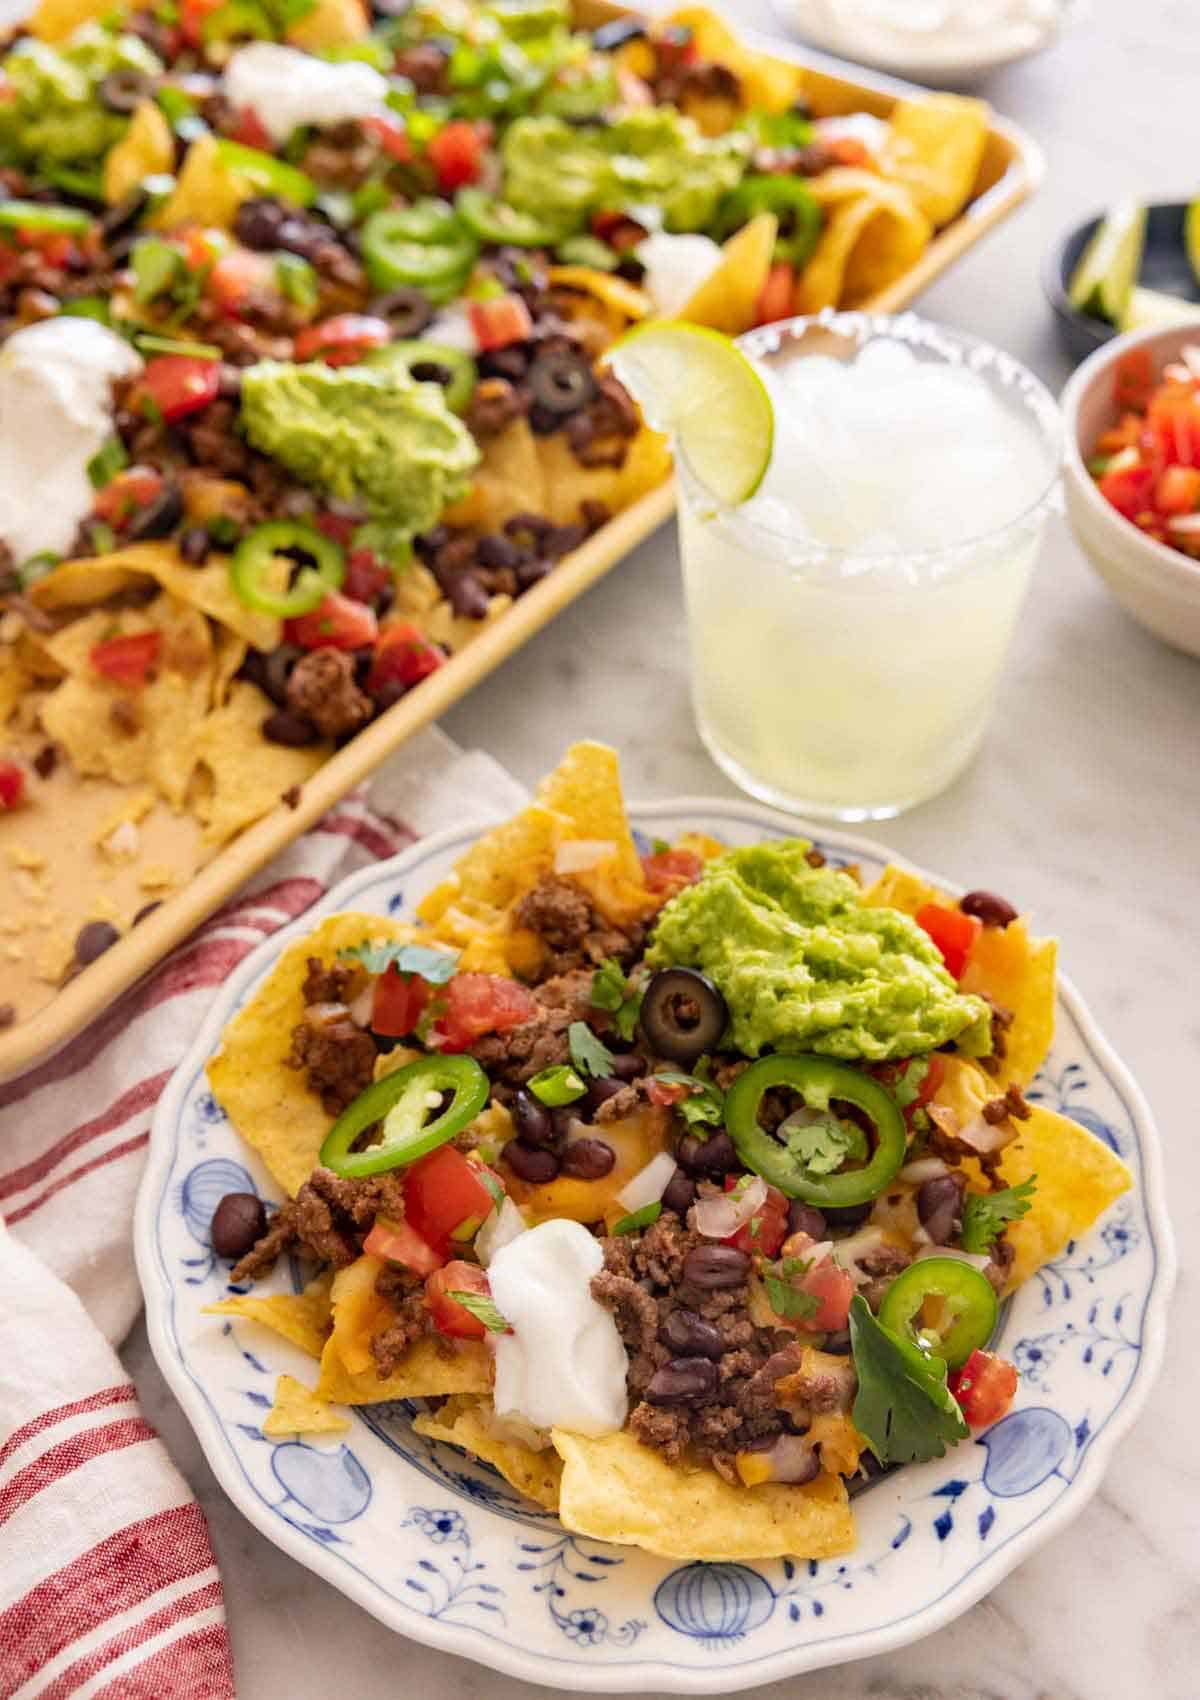 A plate with a serving of nachos by a drink and sheet pan of more nachos.